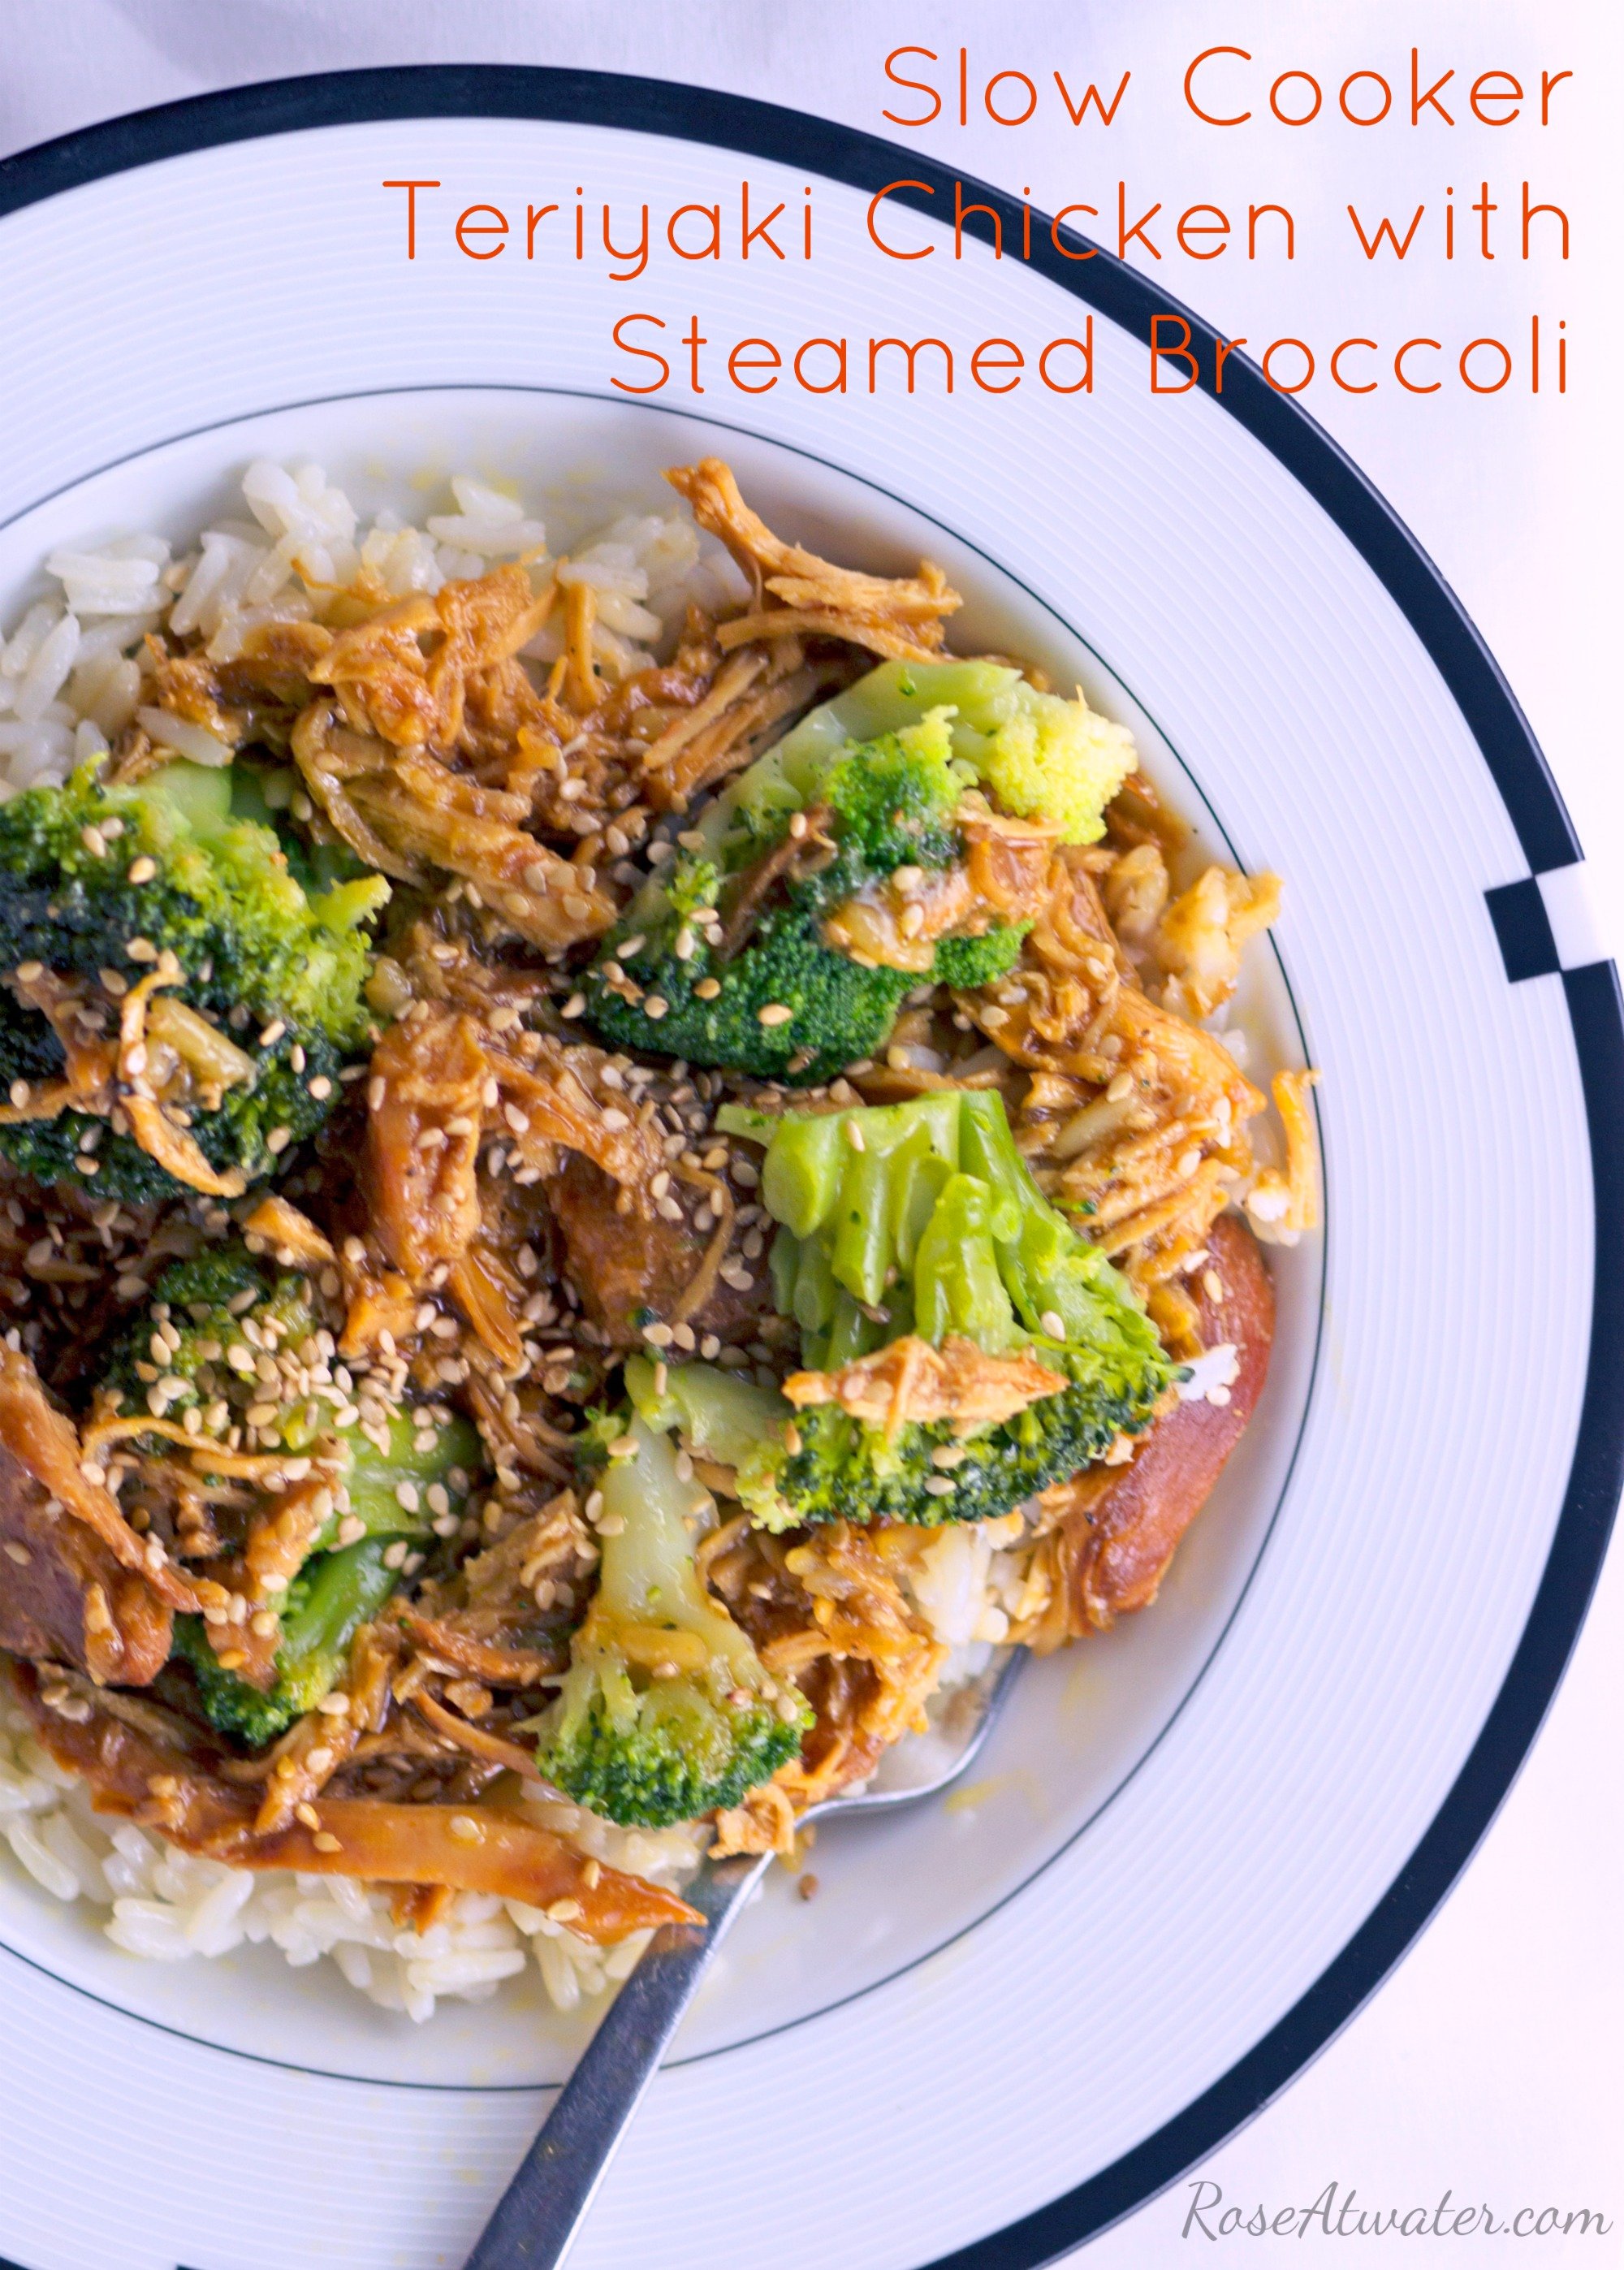 Crock Pot Teriyaki Chicken with Steamed Broccoli Recipe Rose Atwater